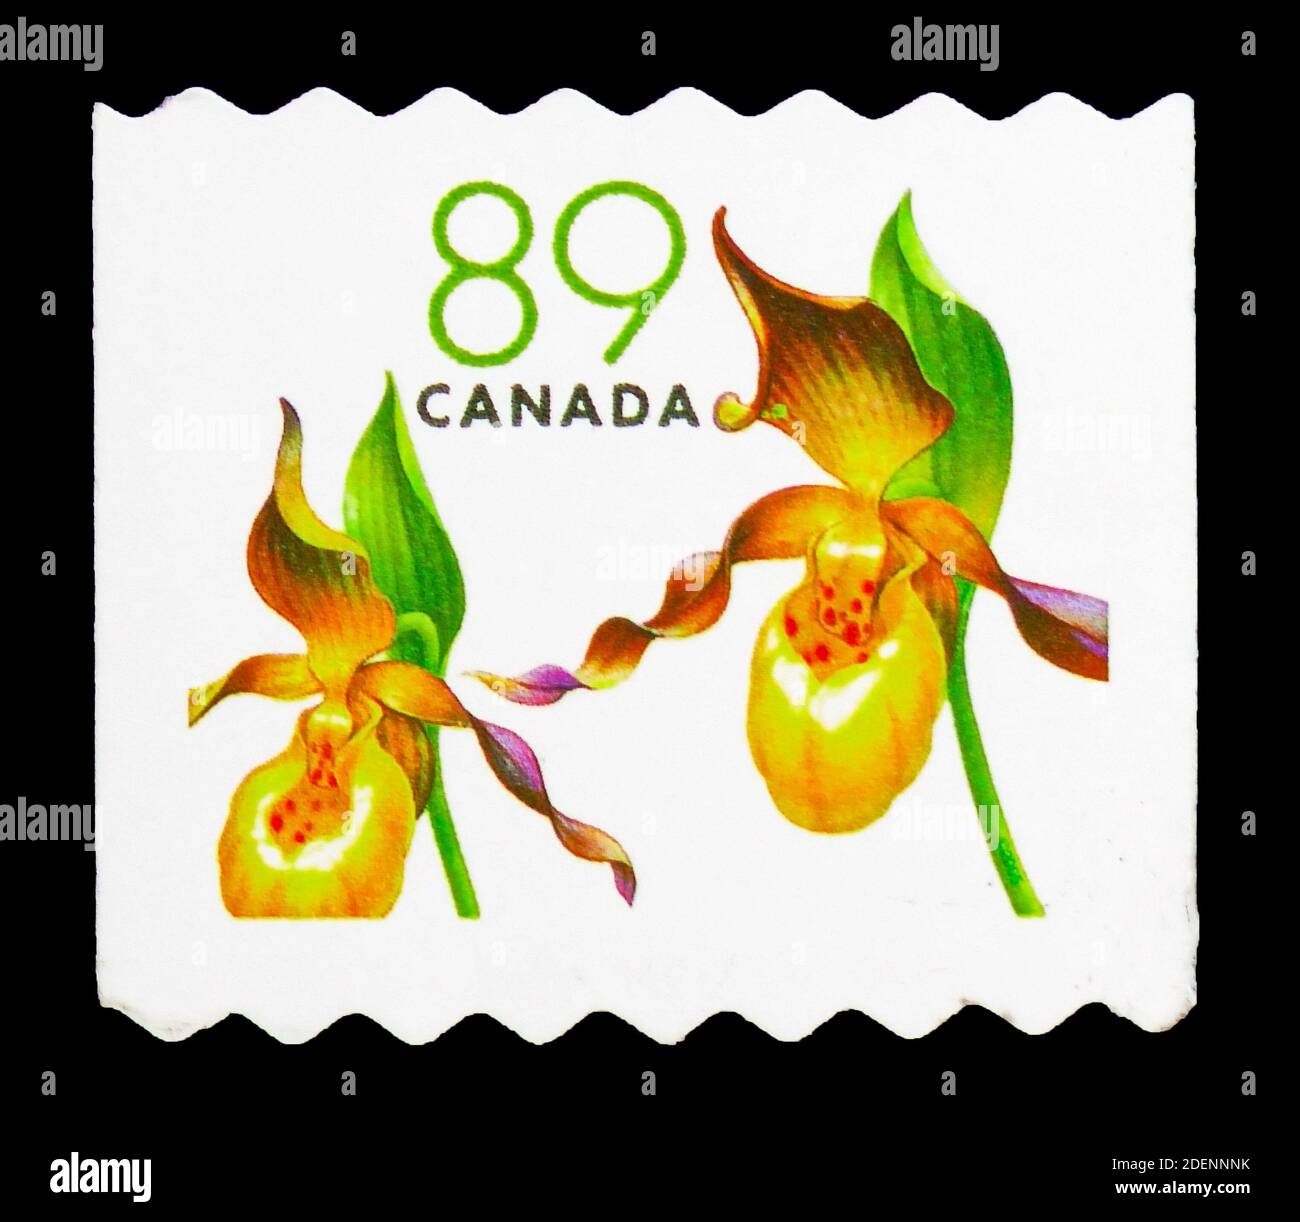 MOSCOW, RUSSIA - JUNE 28, 2020: Postage stamp printed in Canada shows Cypripedium calceolus - Lady's-slipper Orchid, Flower Definitives (1st series) s Stock Photo